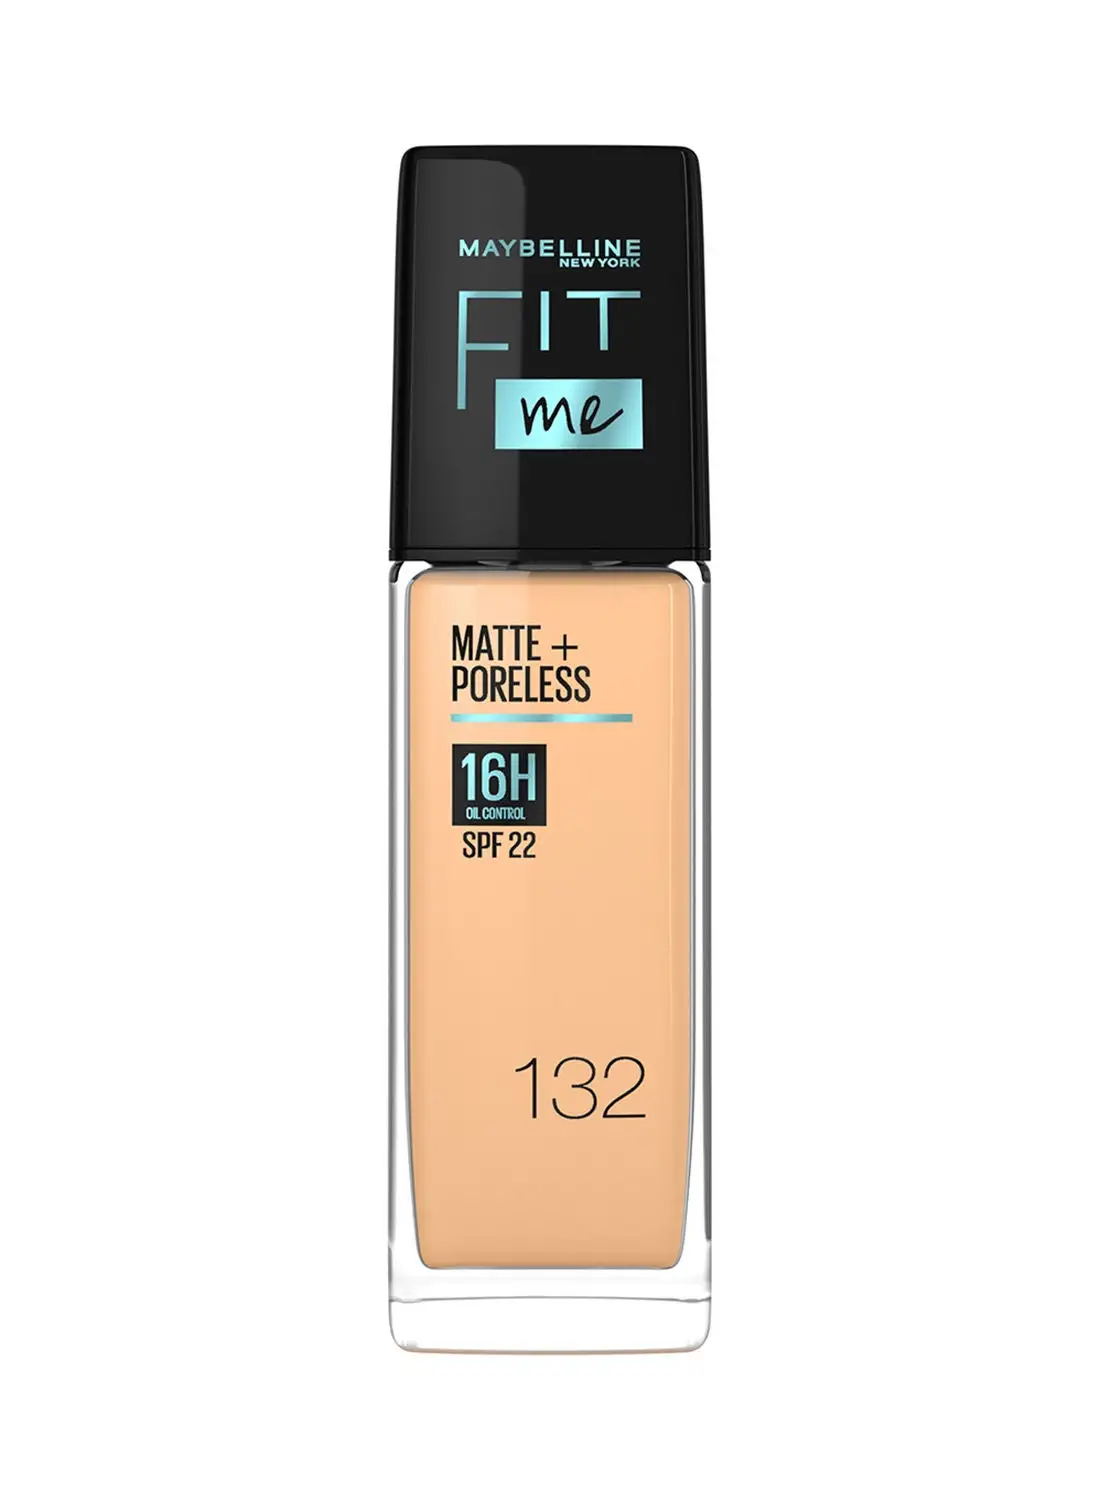 MAYBELLINE NEW YORK Maybelline New York Fit Me Matte & Poreless Foundation 16H Oil Control with SPF 22 - 132